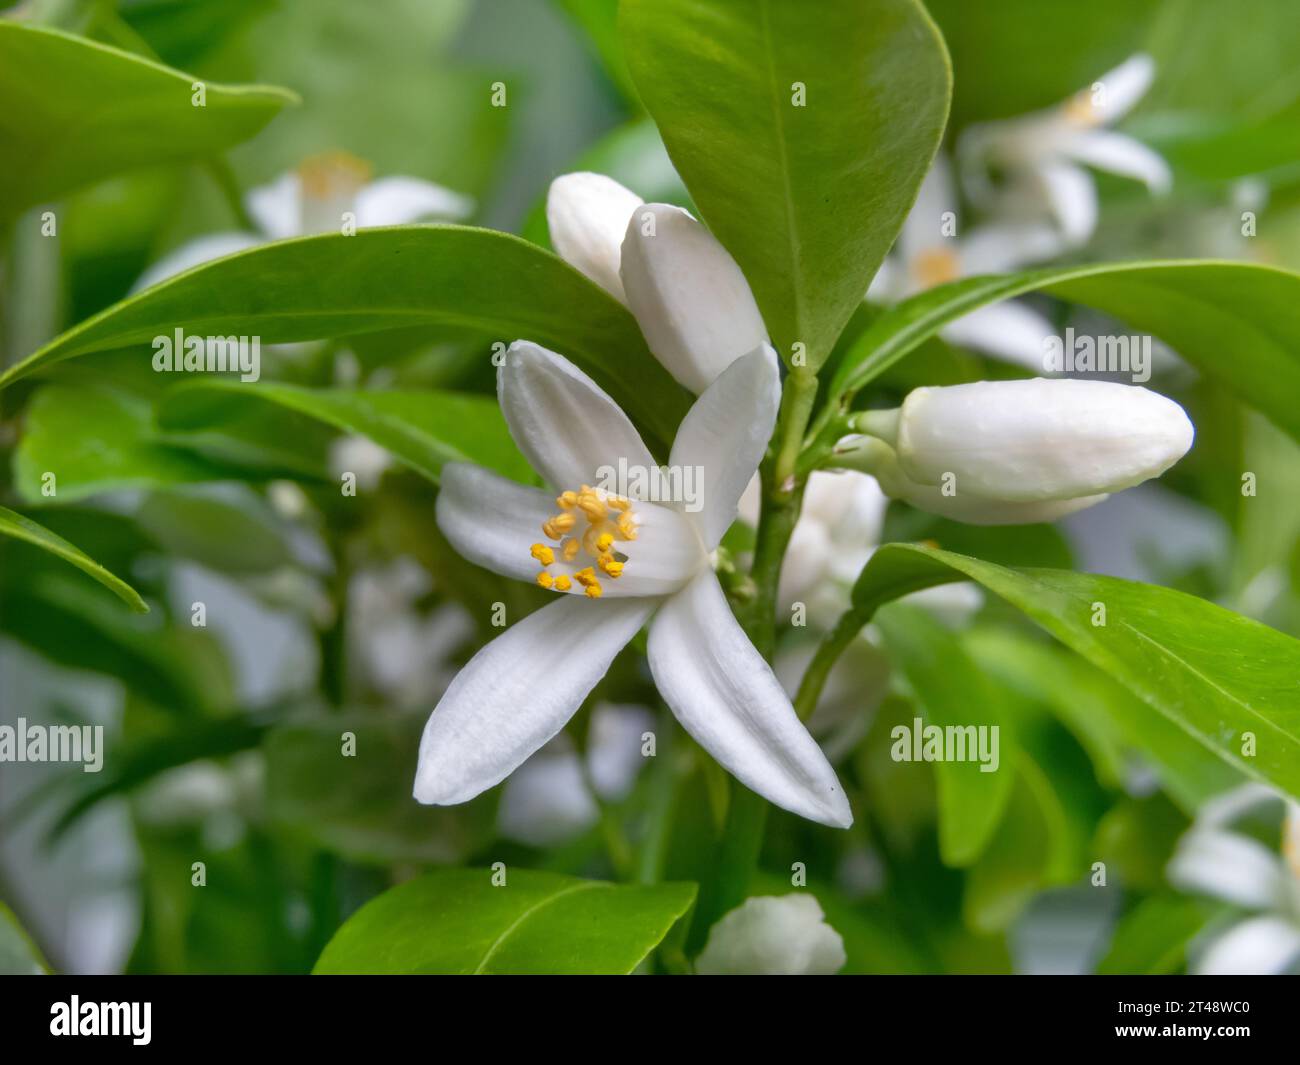 Calamondin or calamansi fruit flowers, buds and leaves branch. Citrus hybrid blossom. Stock Photo